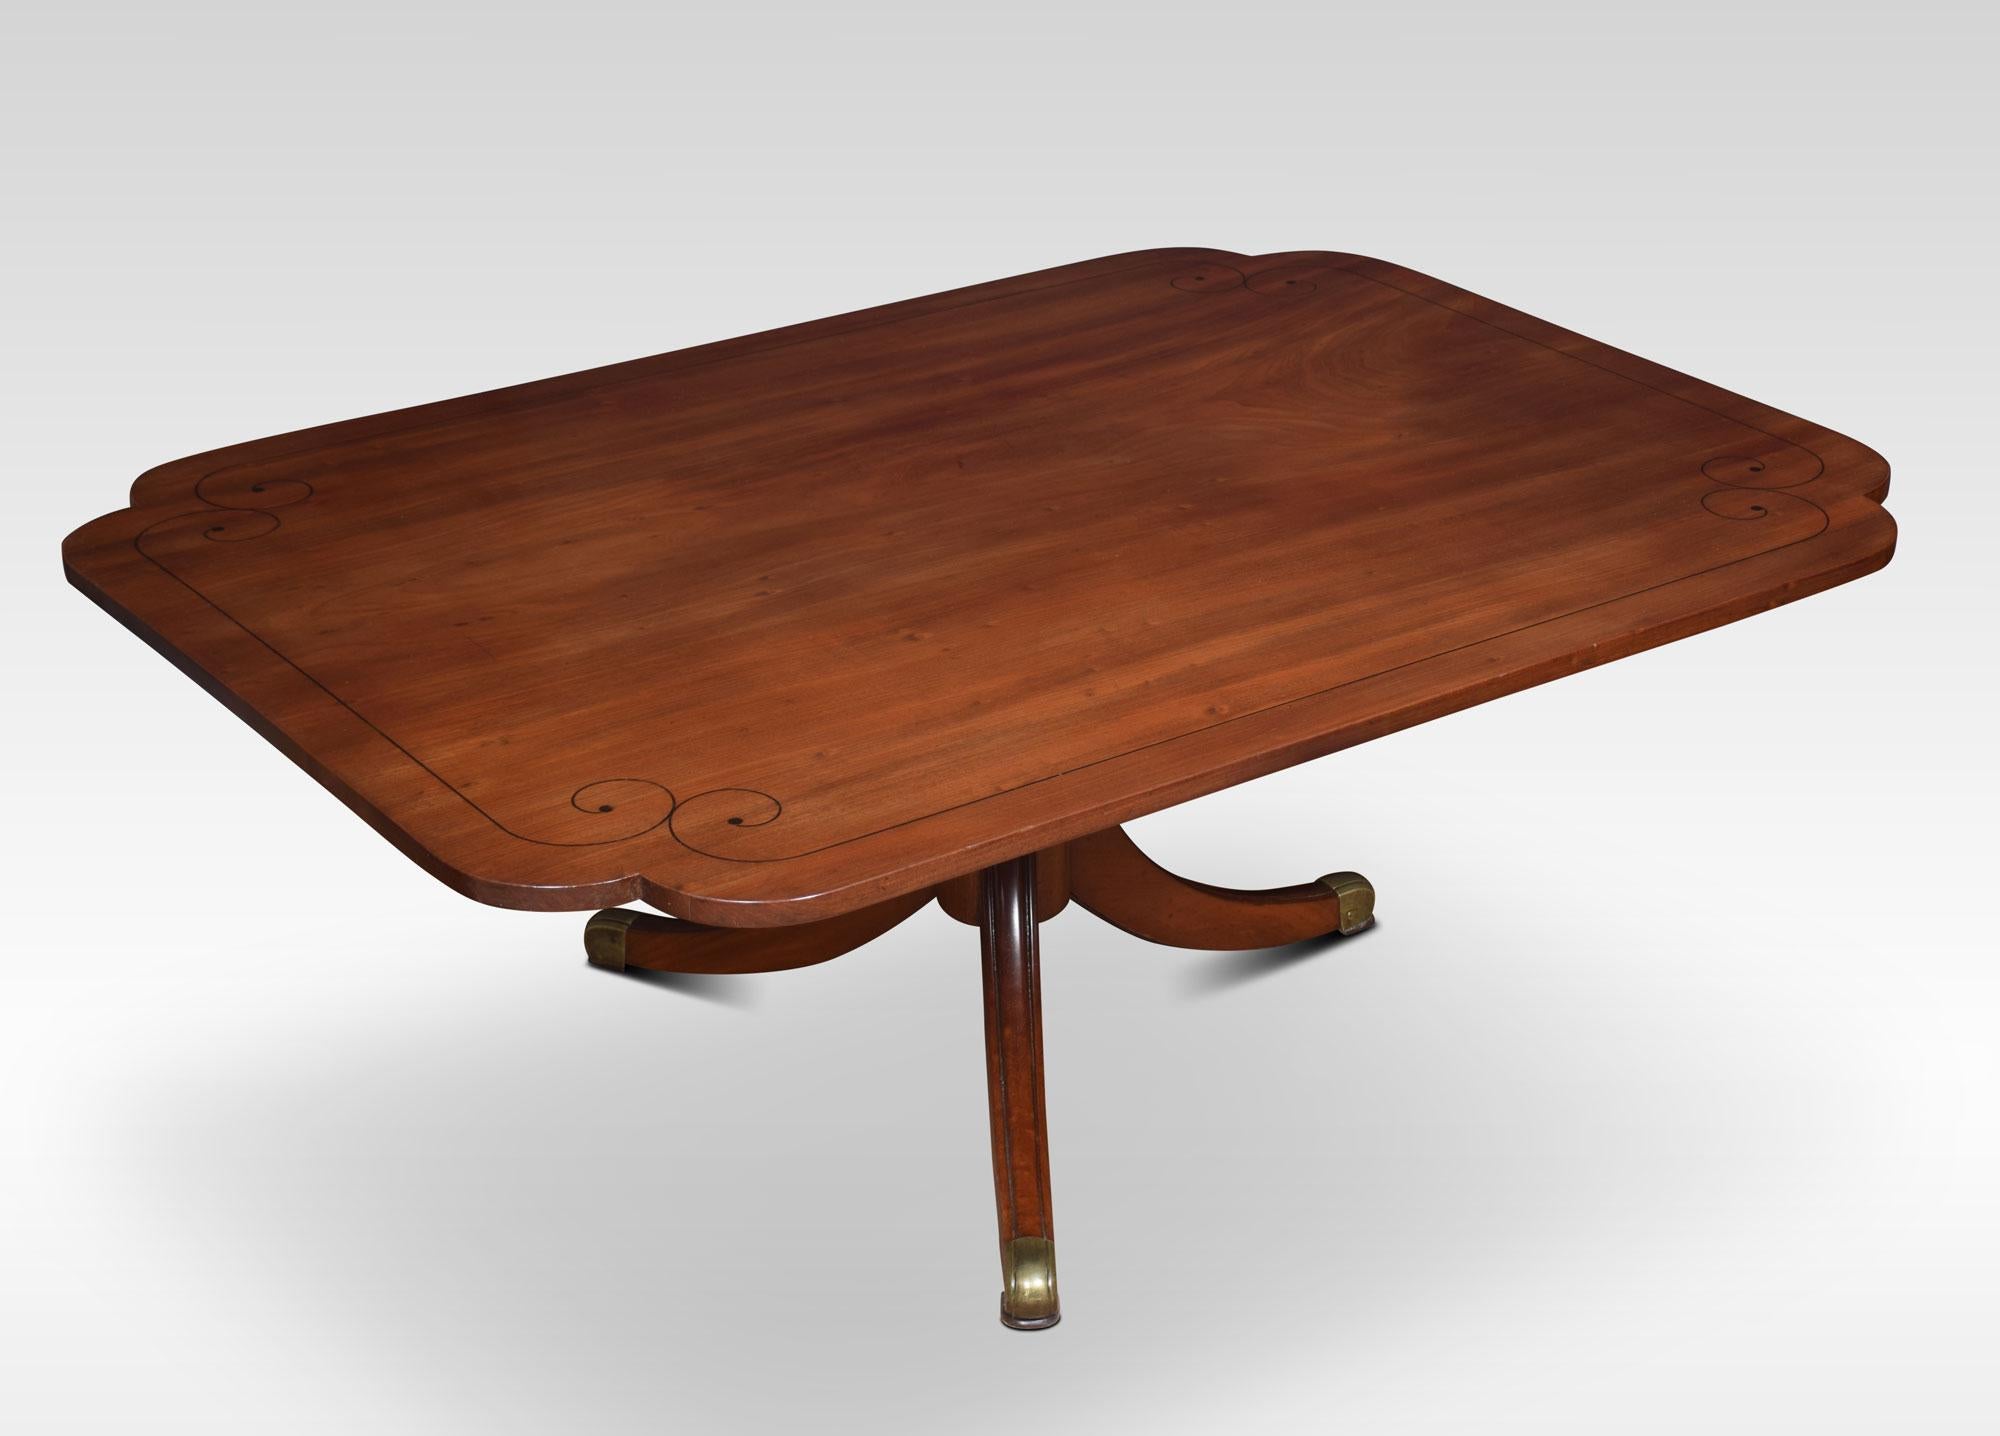 Regency mahogany coffee table, the shaped rectangular top having ebony inlay and moulded edge raised on a pedestal base and splayed legs. This table has been reduced to coffee table height
Dimensions:
Height 20.5 inches
Length 53.5 inches
width